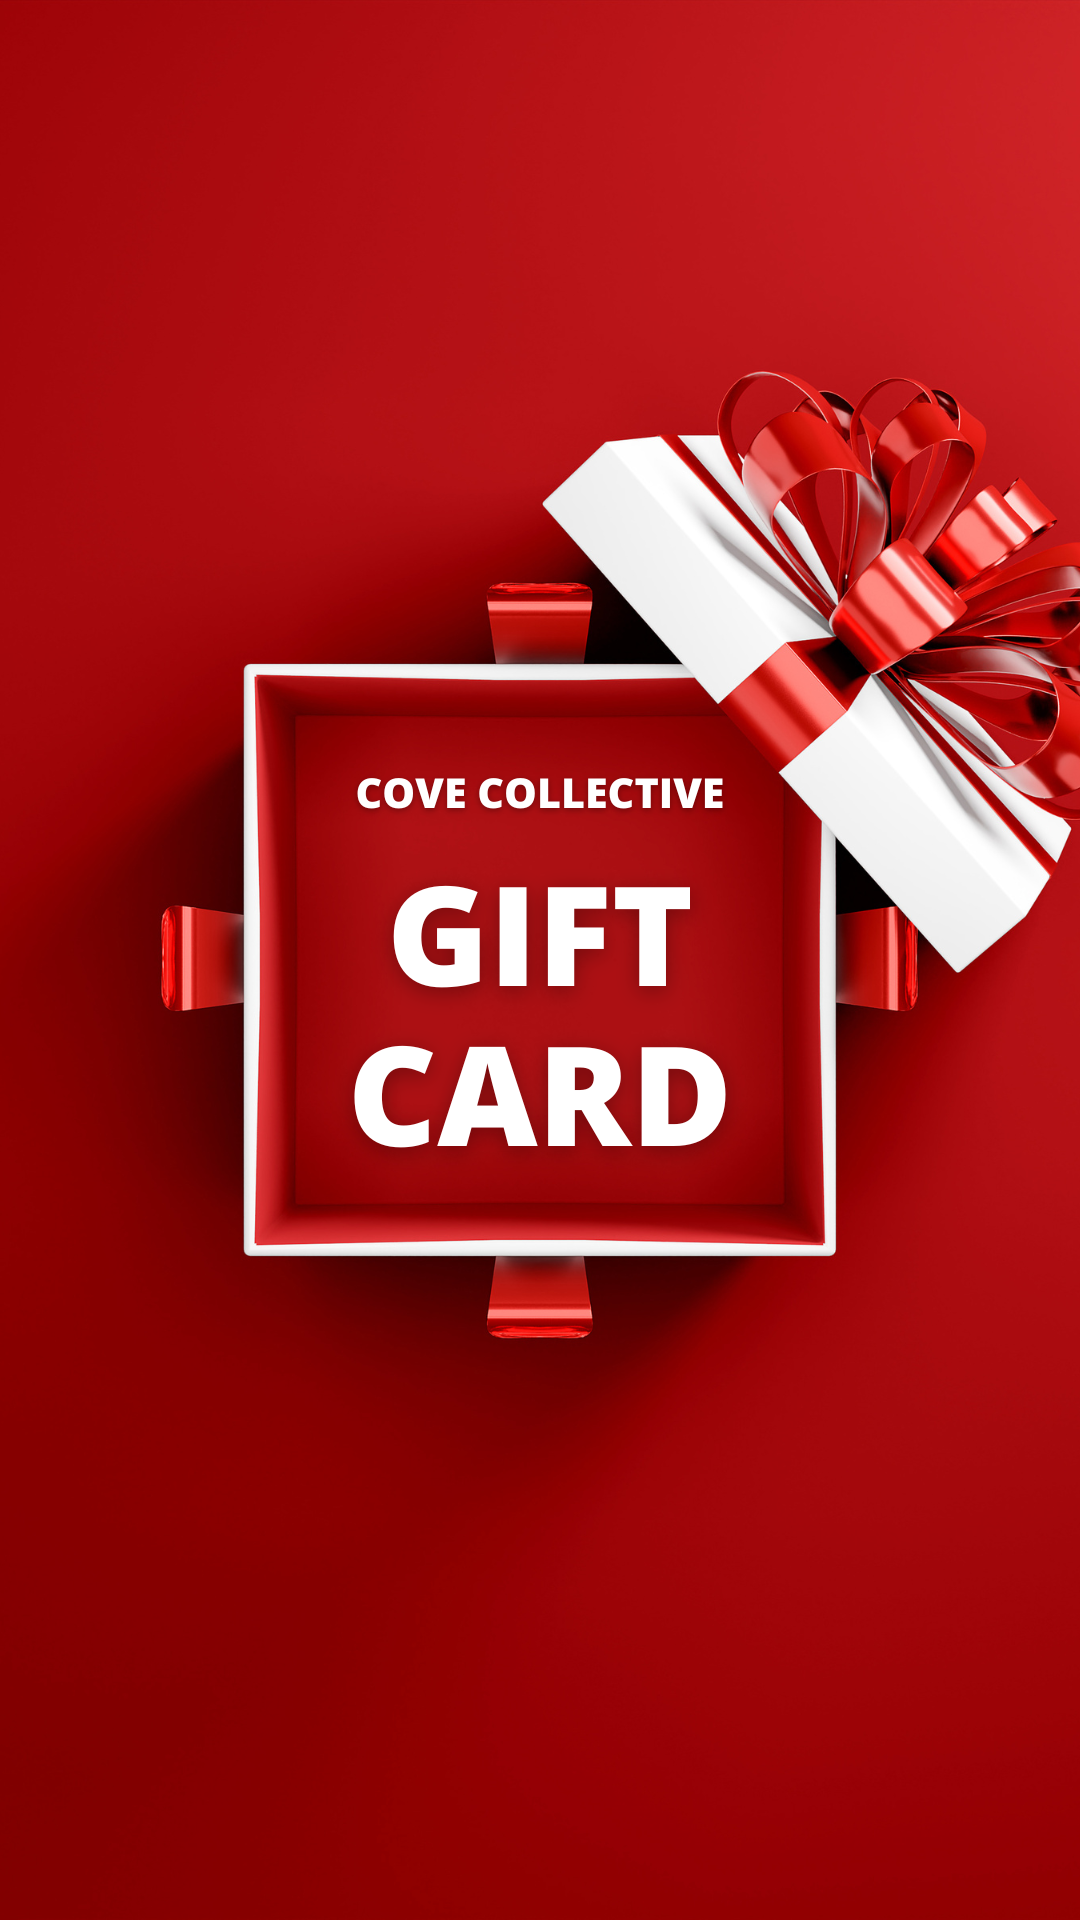 Cove Collective Gift Card